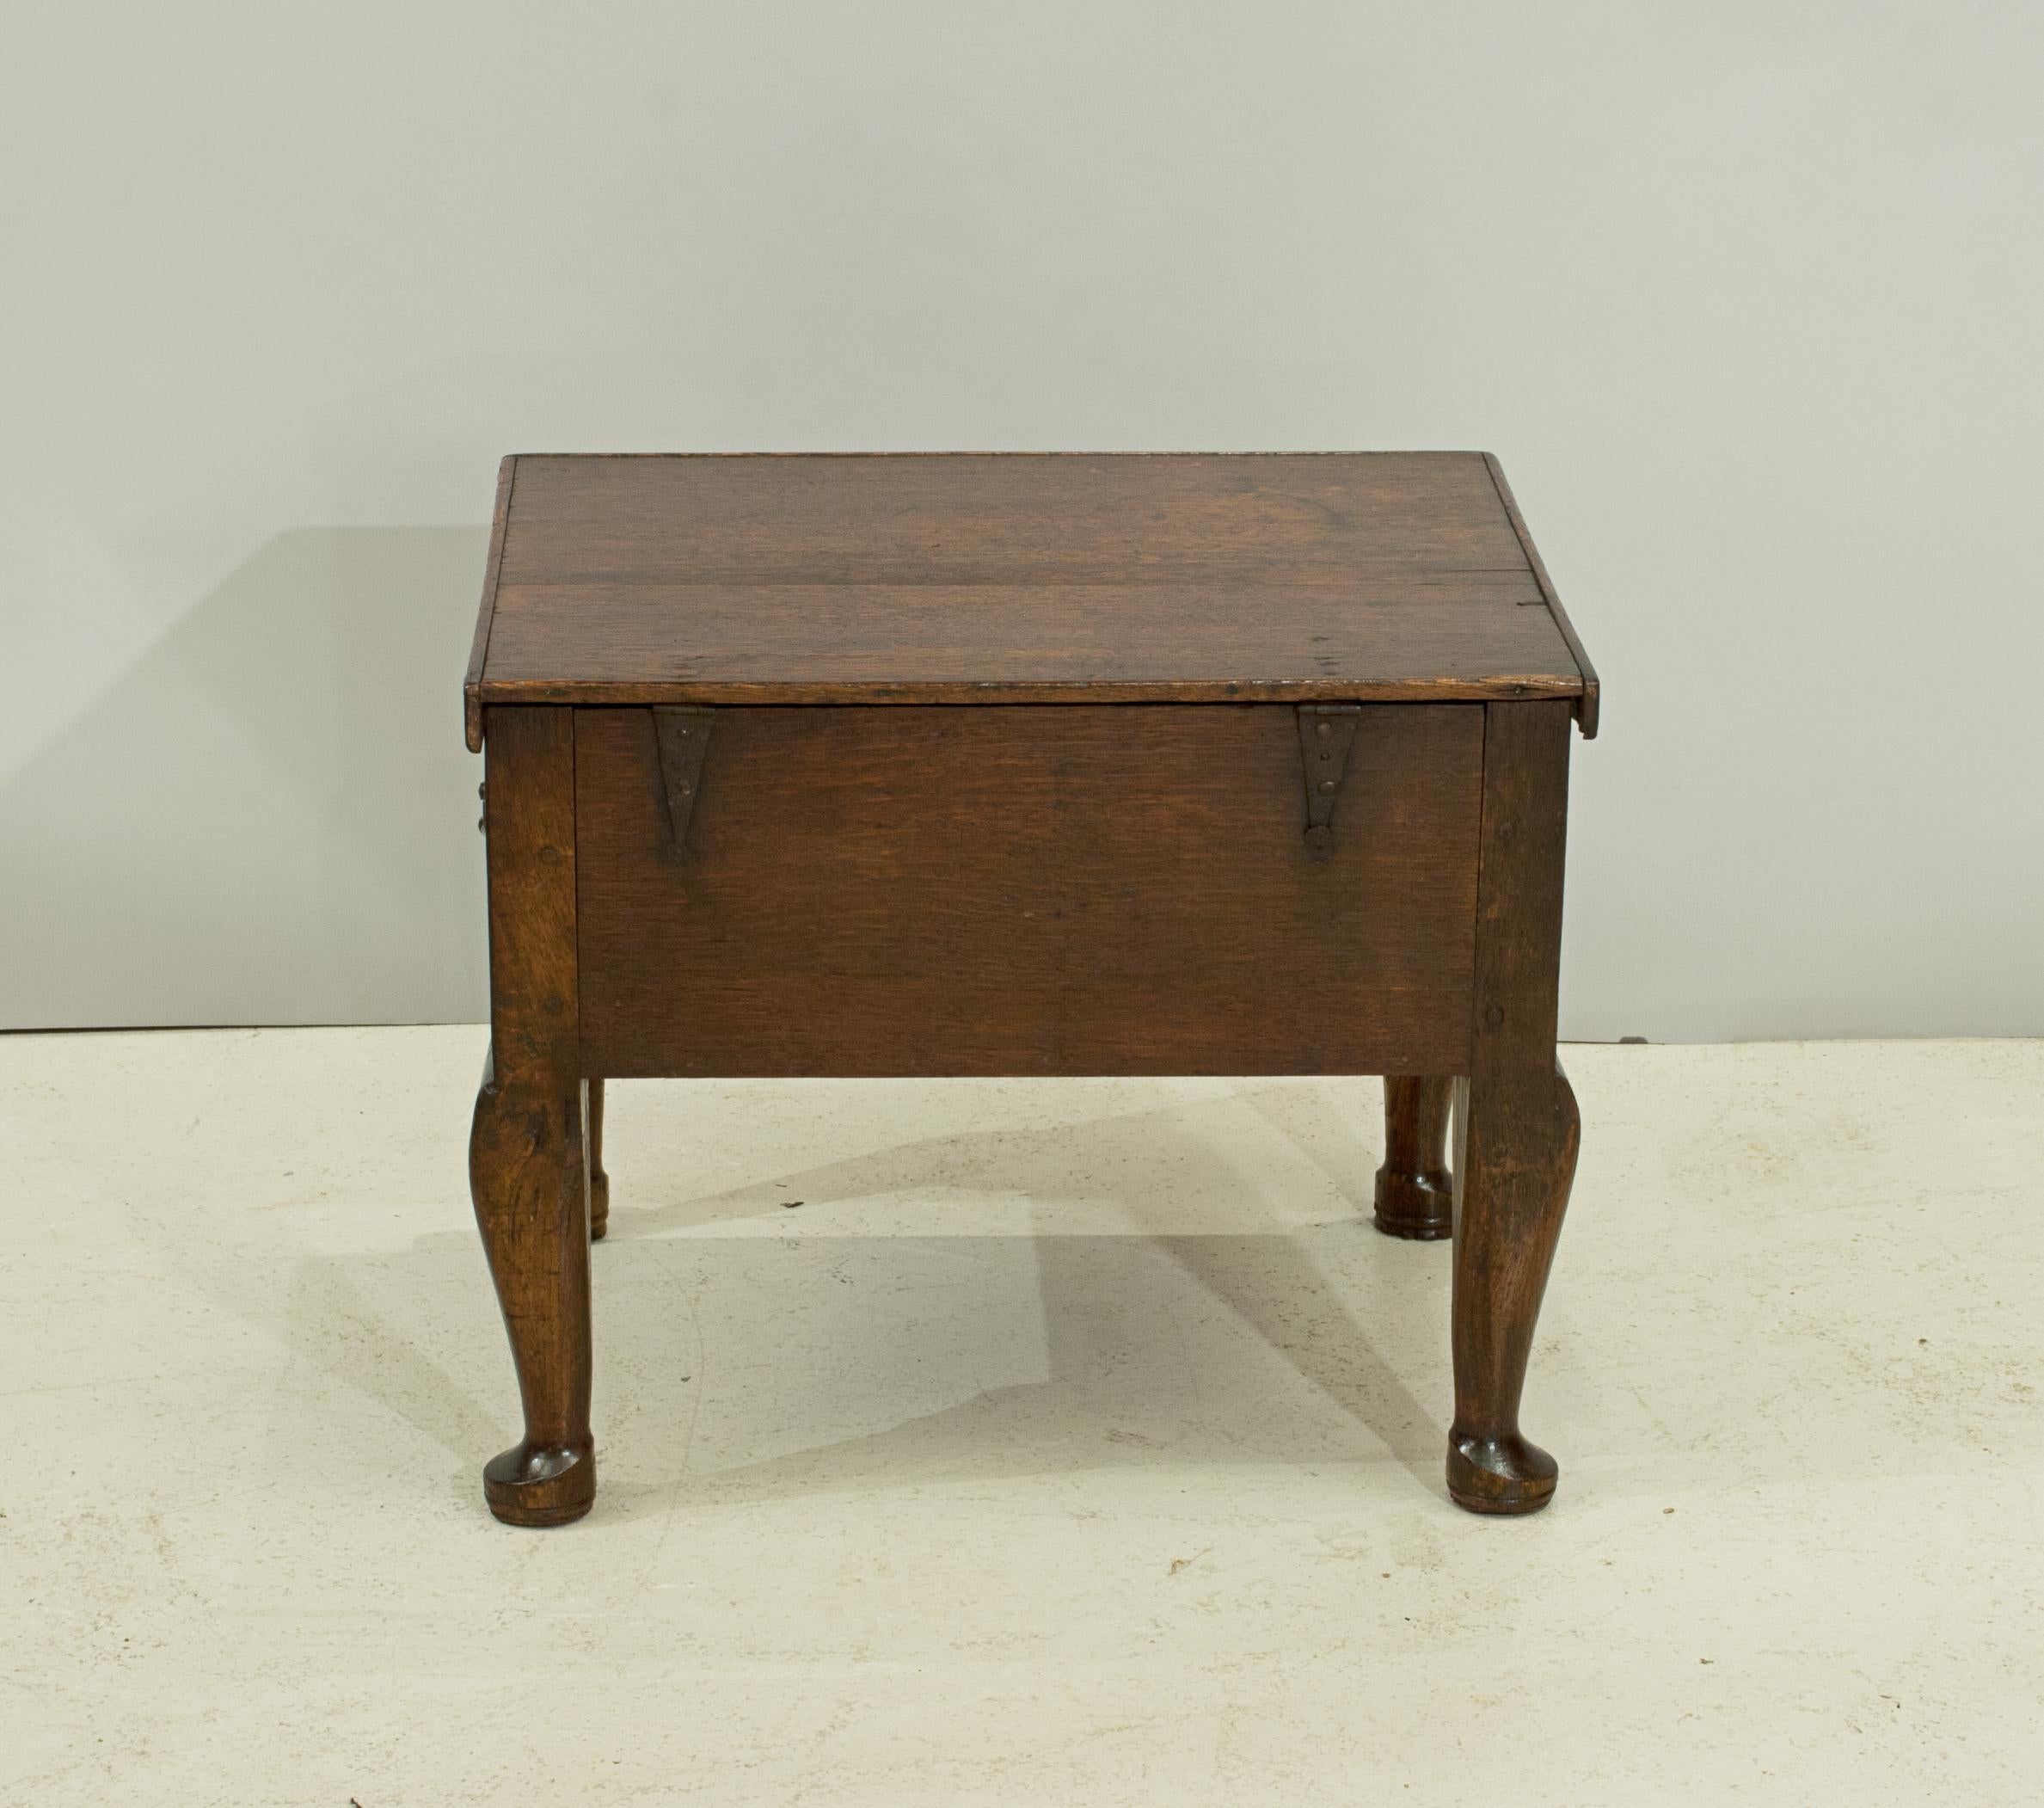 Early 19th Century Antique Oak Commode on Cabriolet Legs, Converted to Storage